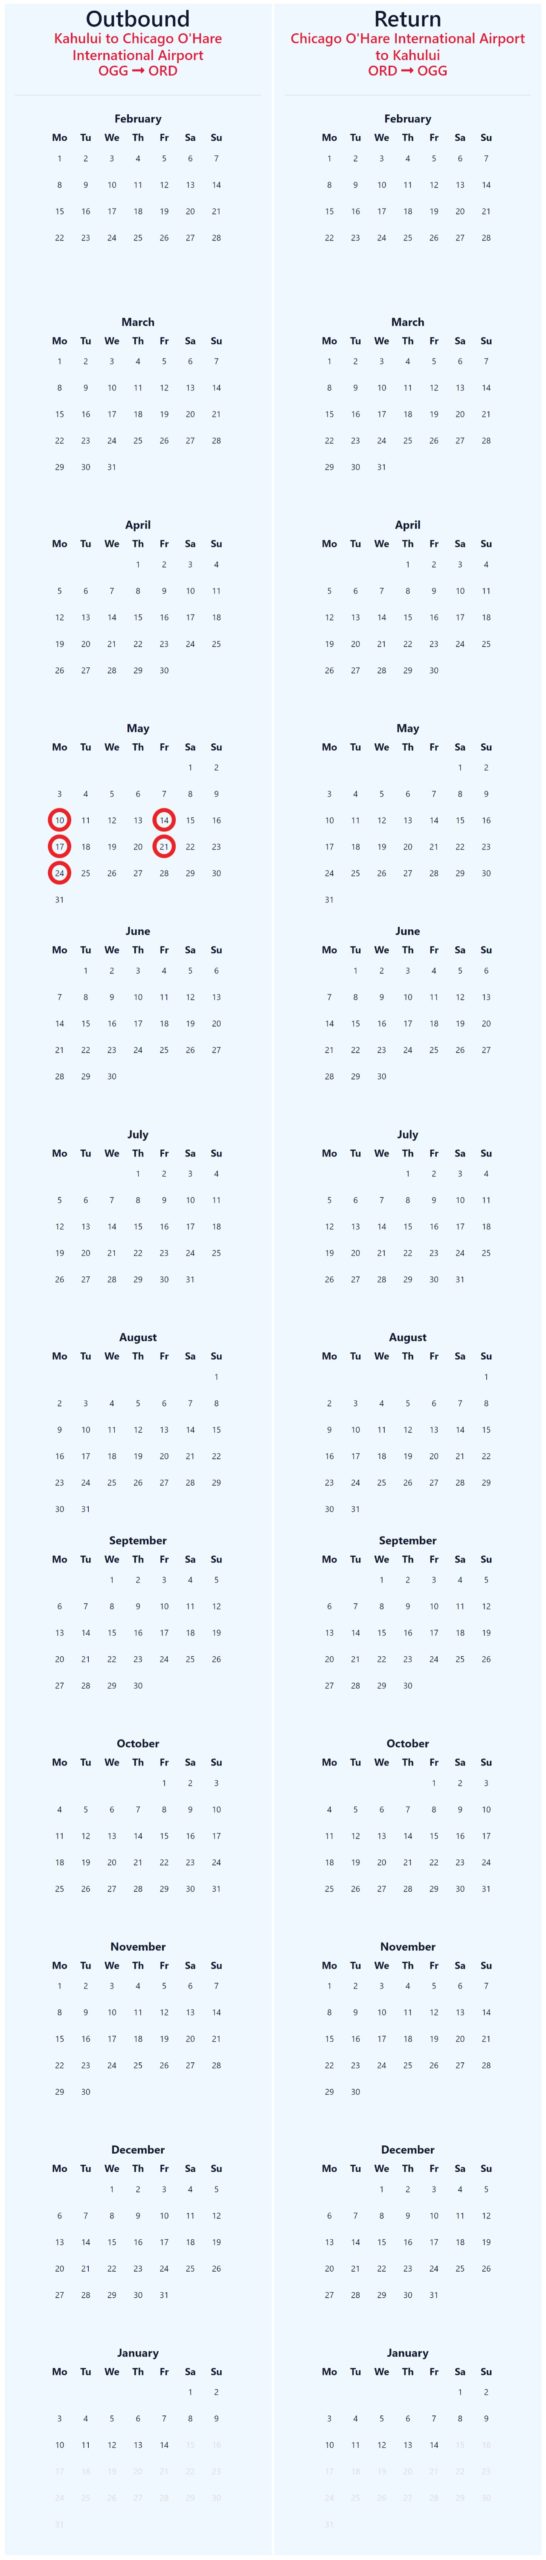 a calendar with months and dates